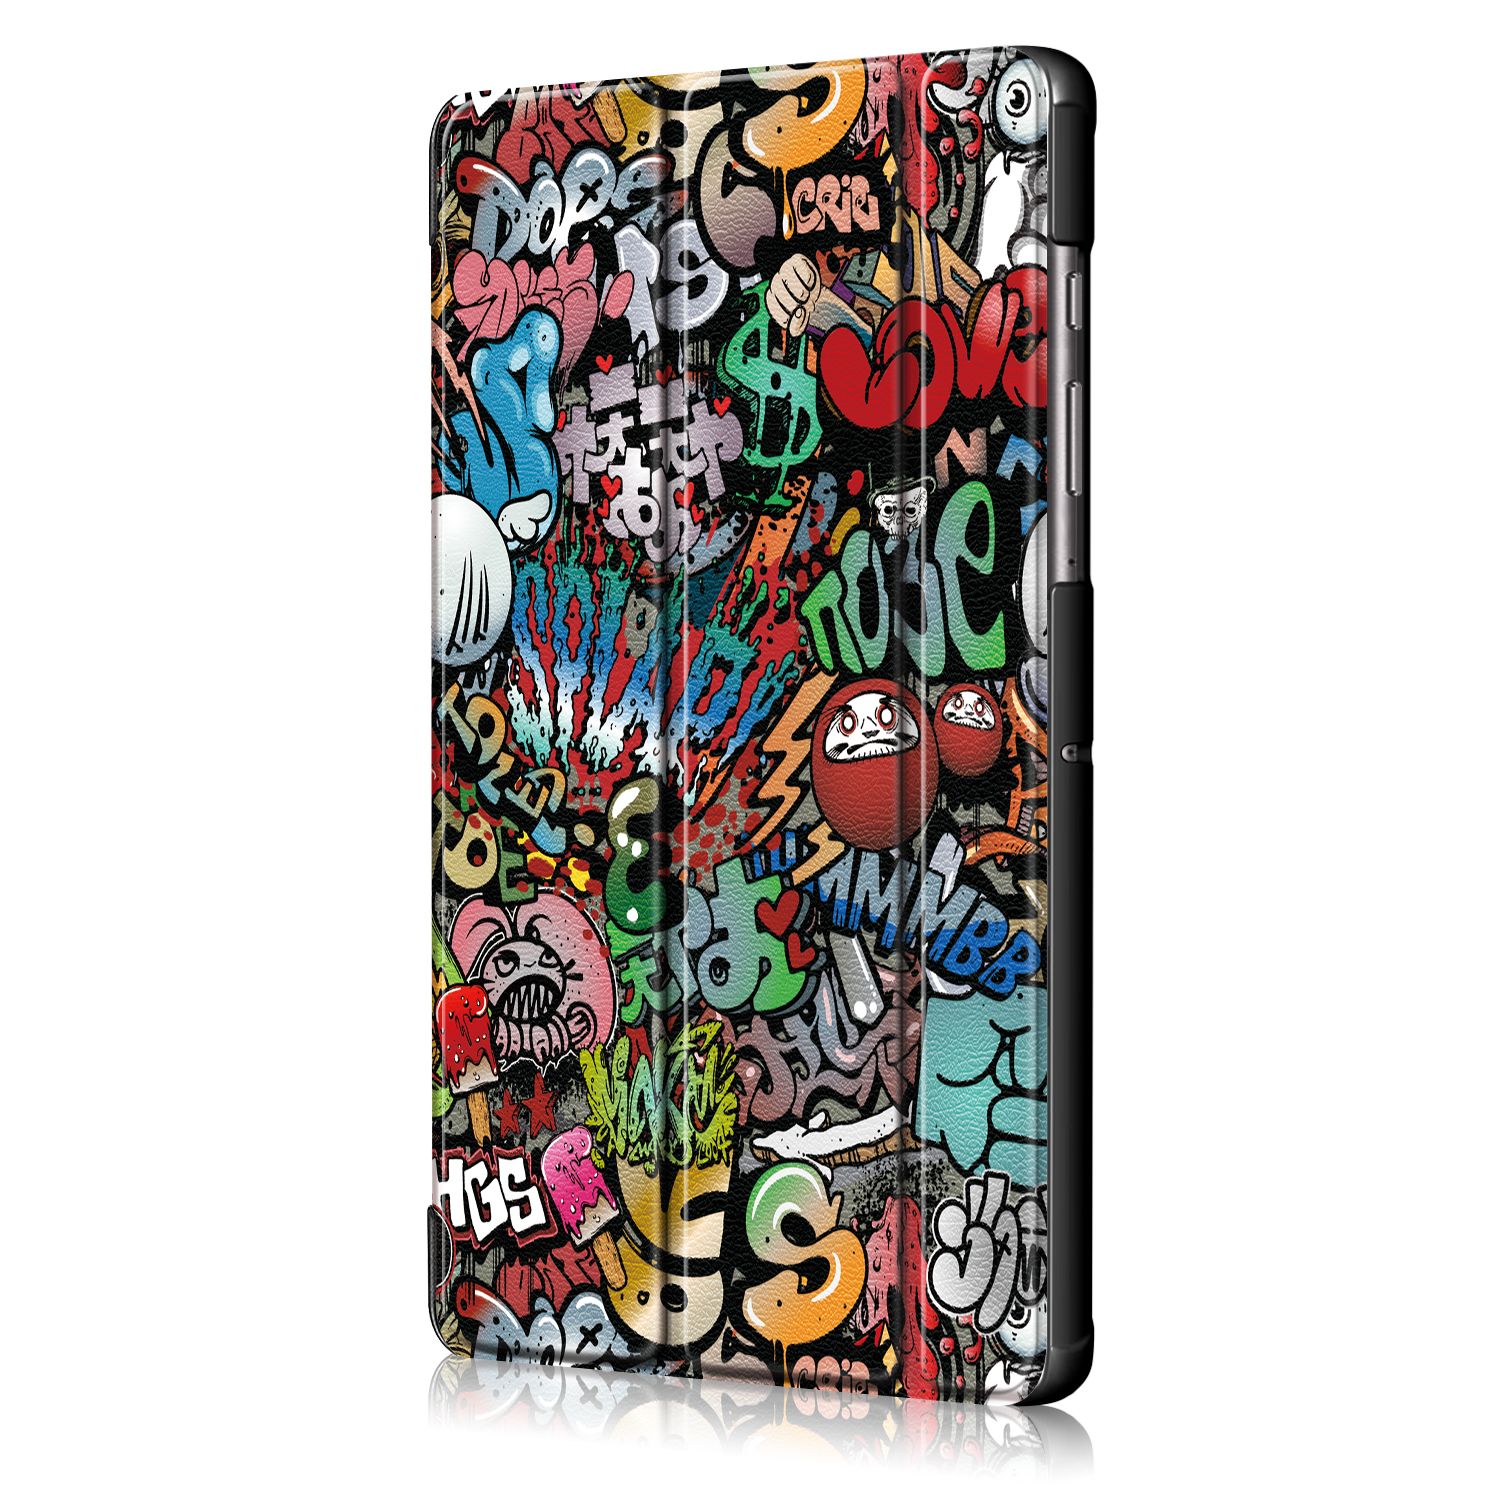 Printing-Tri-Fold-Tablet-Case-for-Samsung-Tab-S6-105---Doodle-1556706